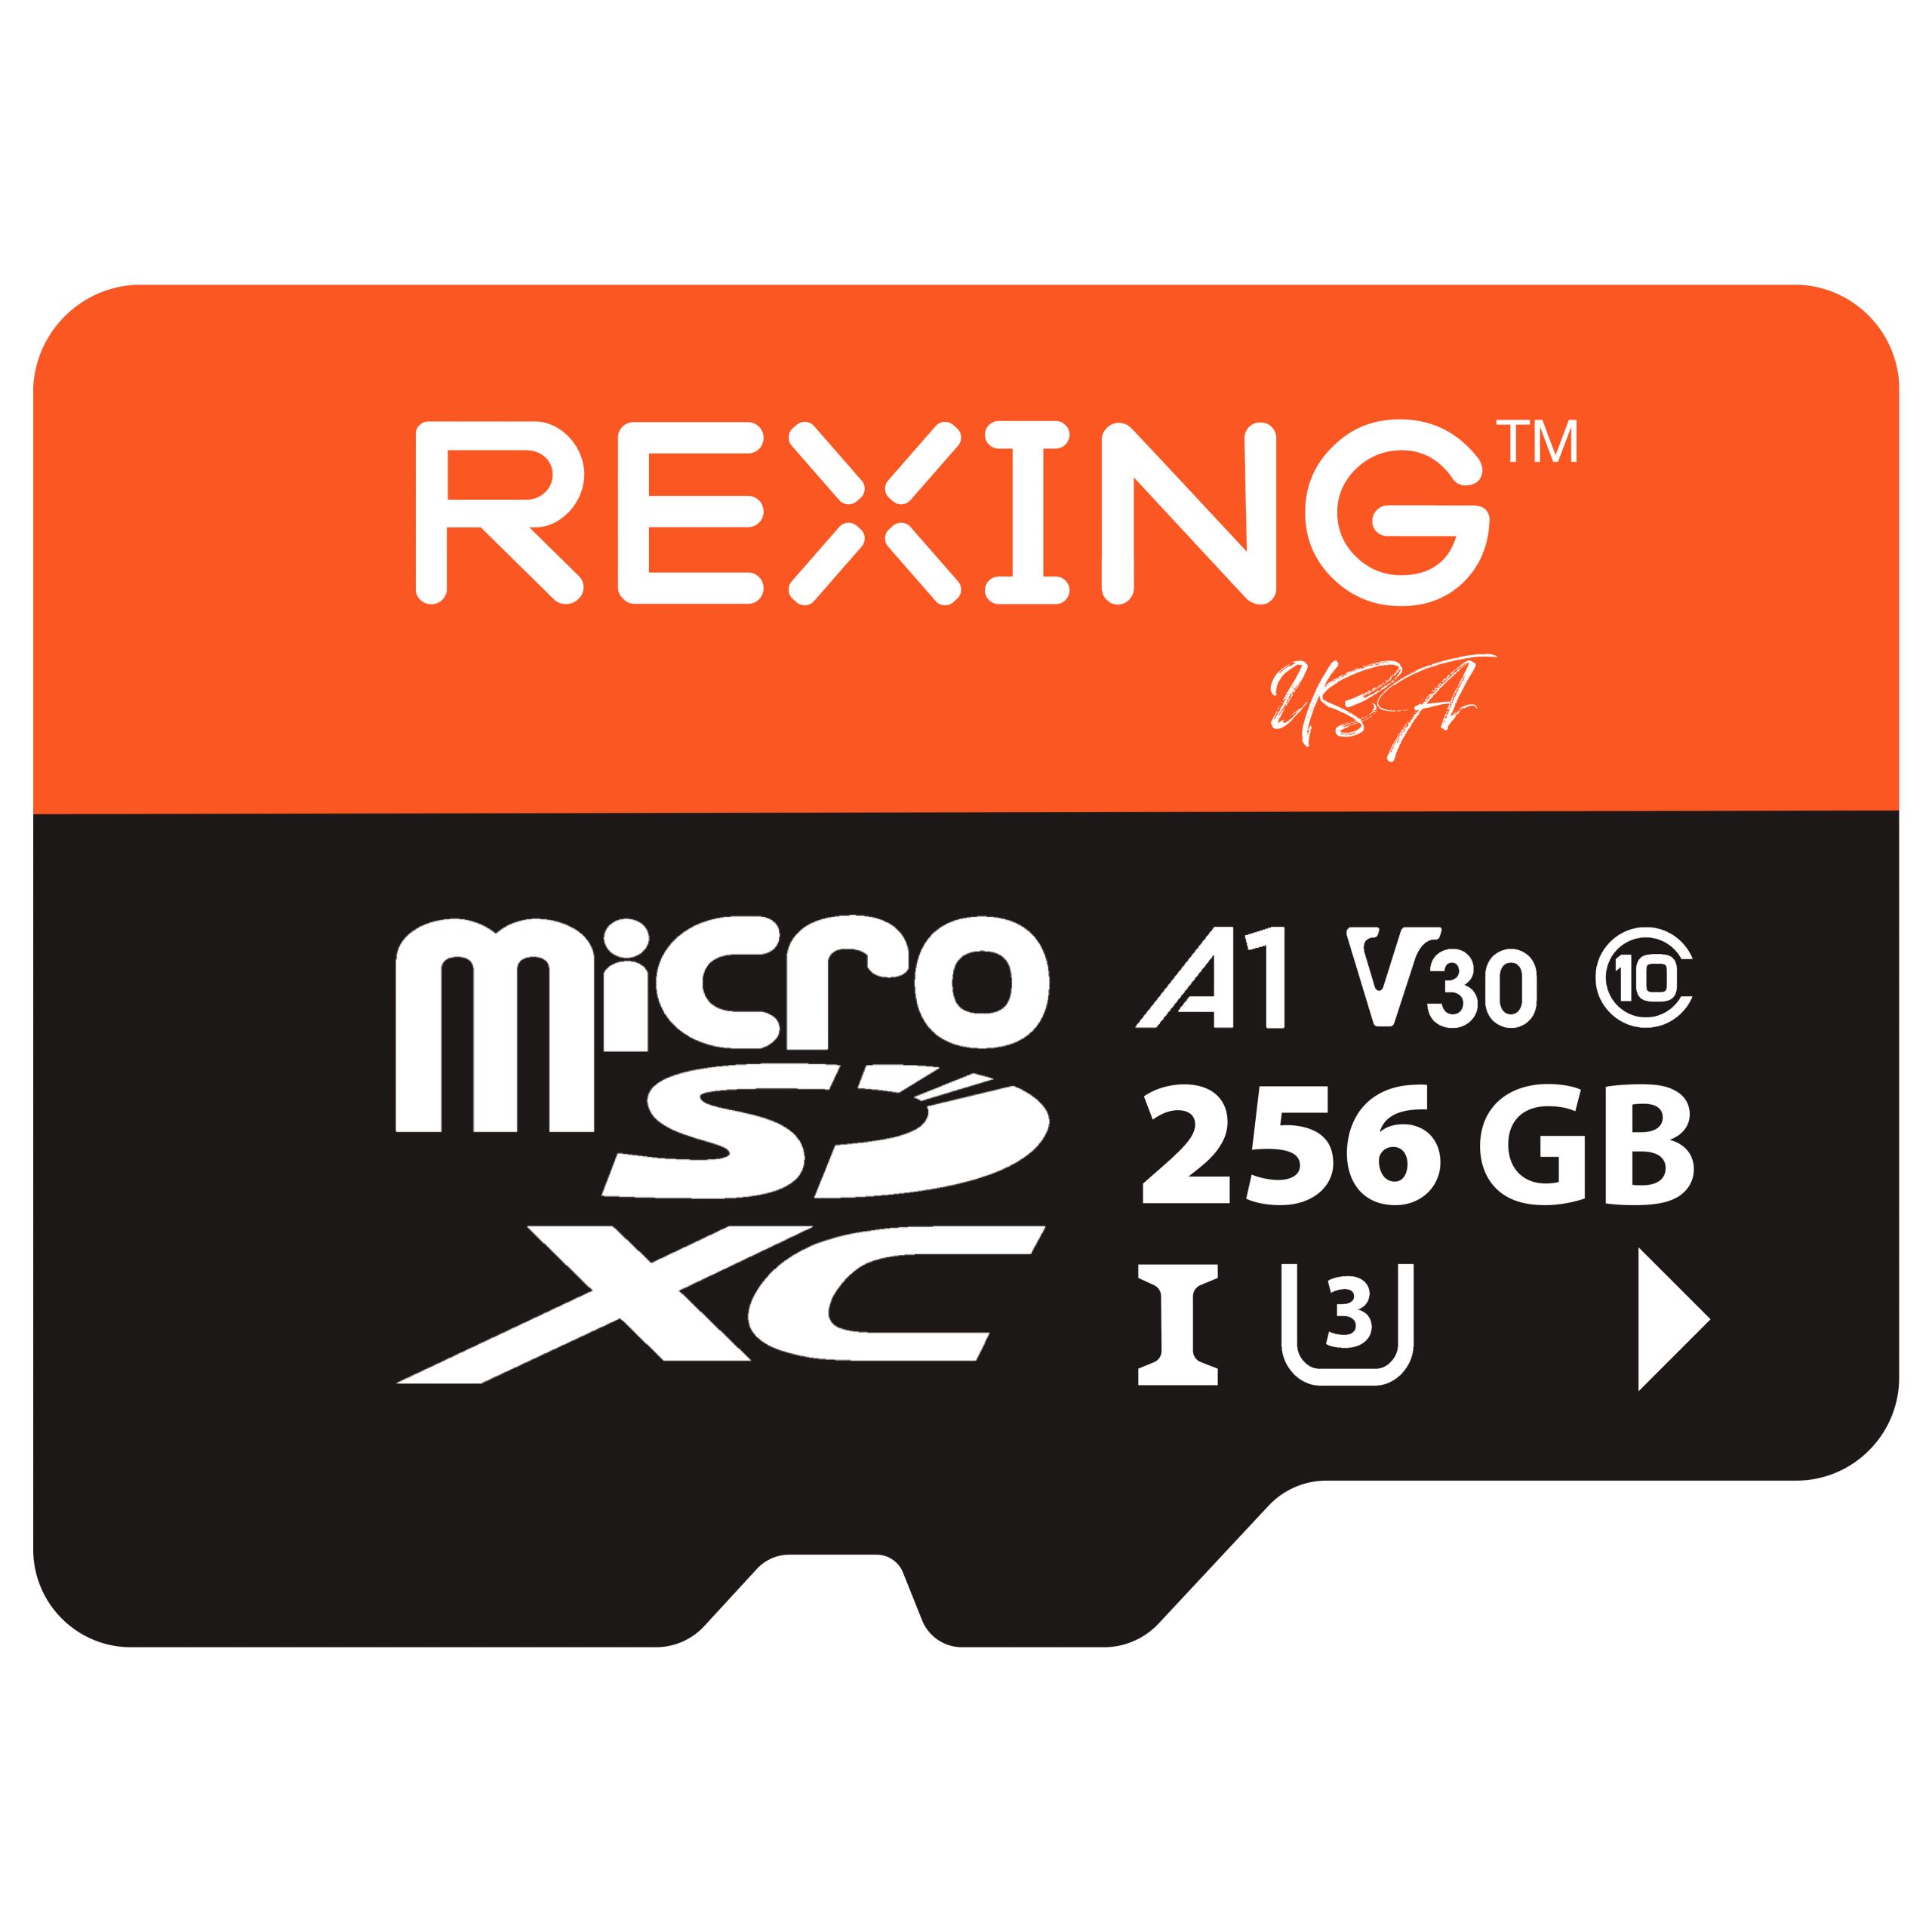 REXING microSDXC UHS-3 4K Full HD Video High Speed Transfer Monitoring SD Card with Adapter for Dash Cams, Surveillance System, Security Camera, & Bo